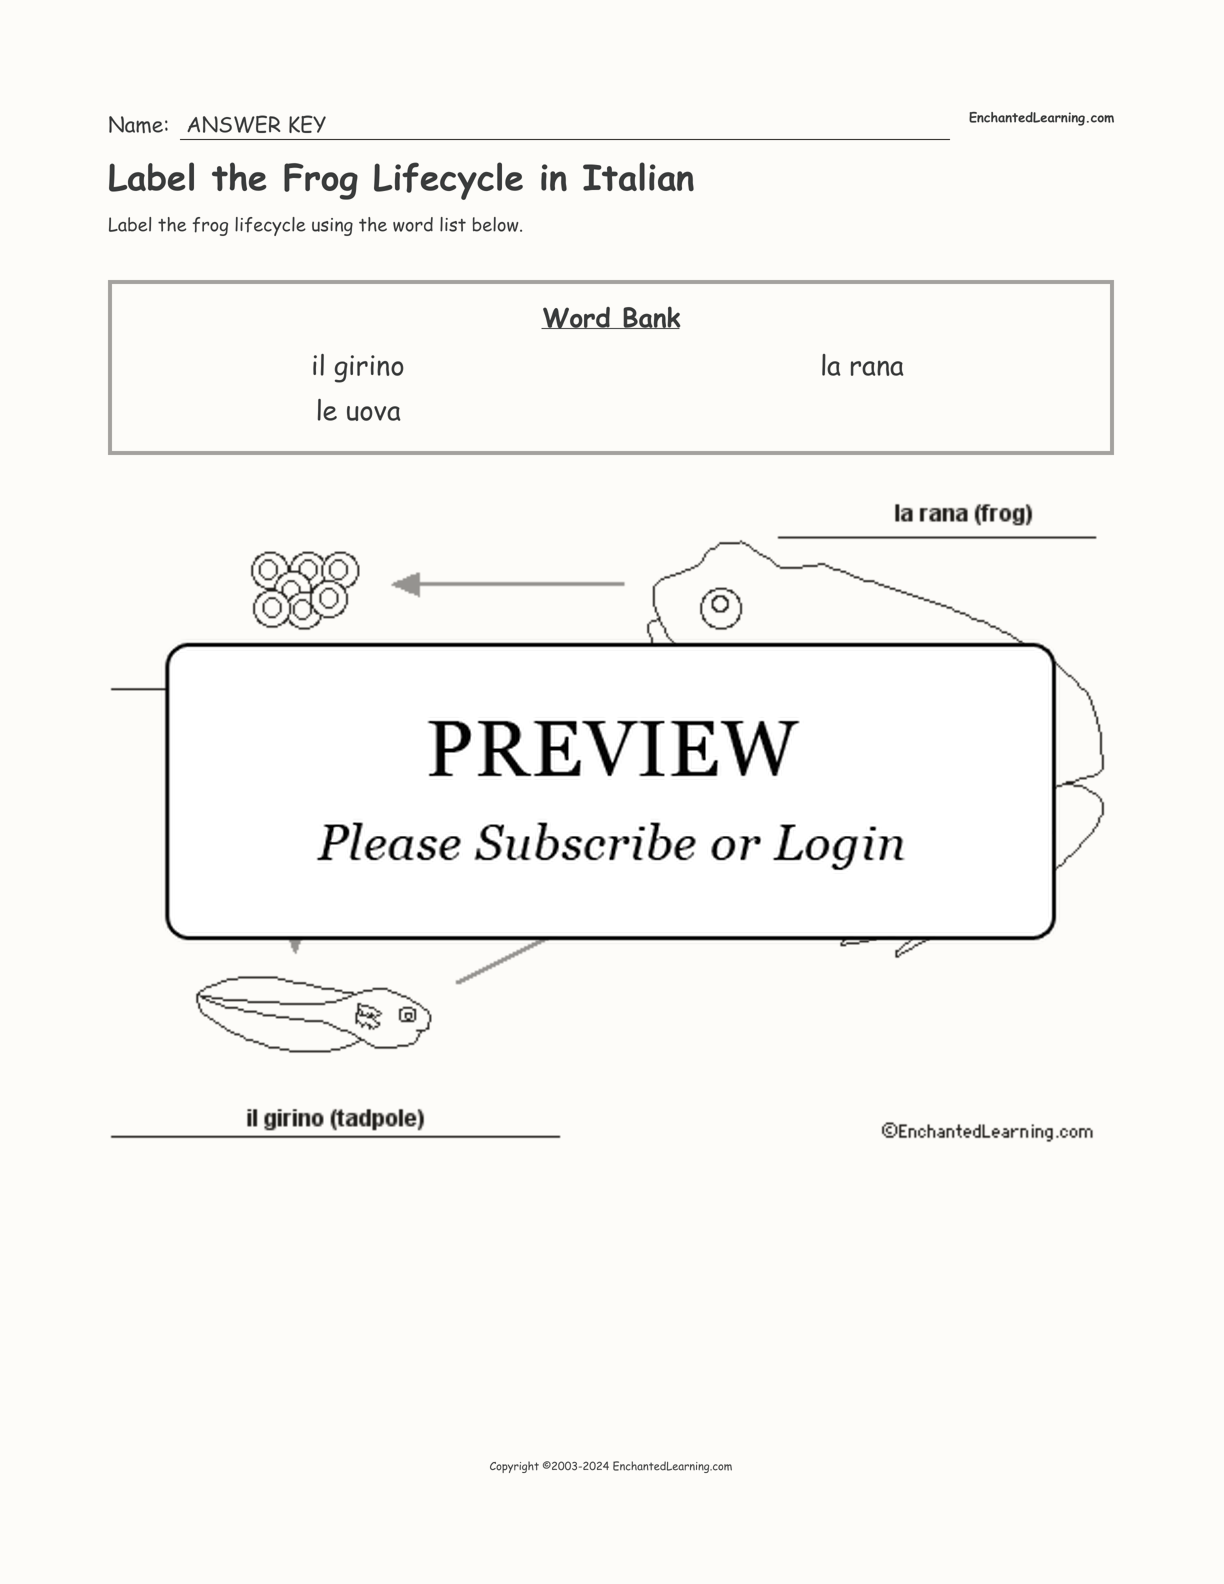 Label the Frog Lifecycle in Italian interactive worksheet page 2